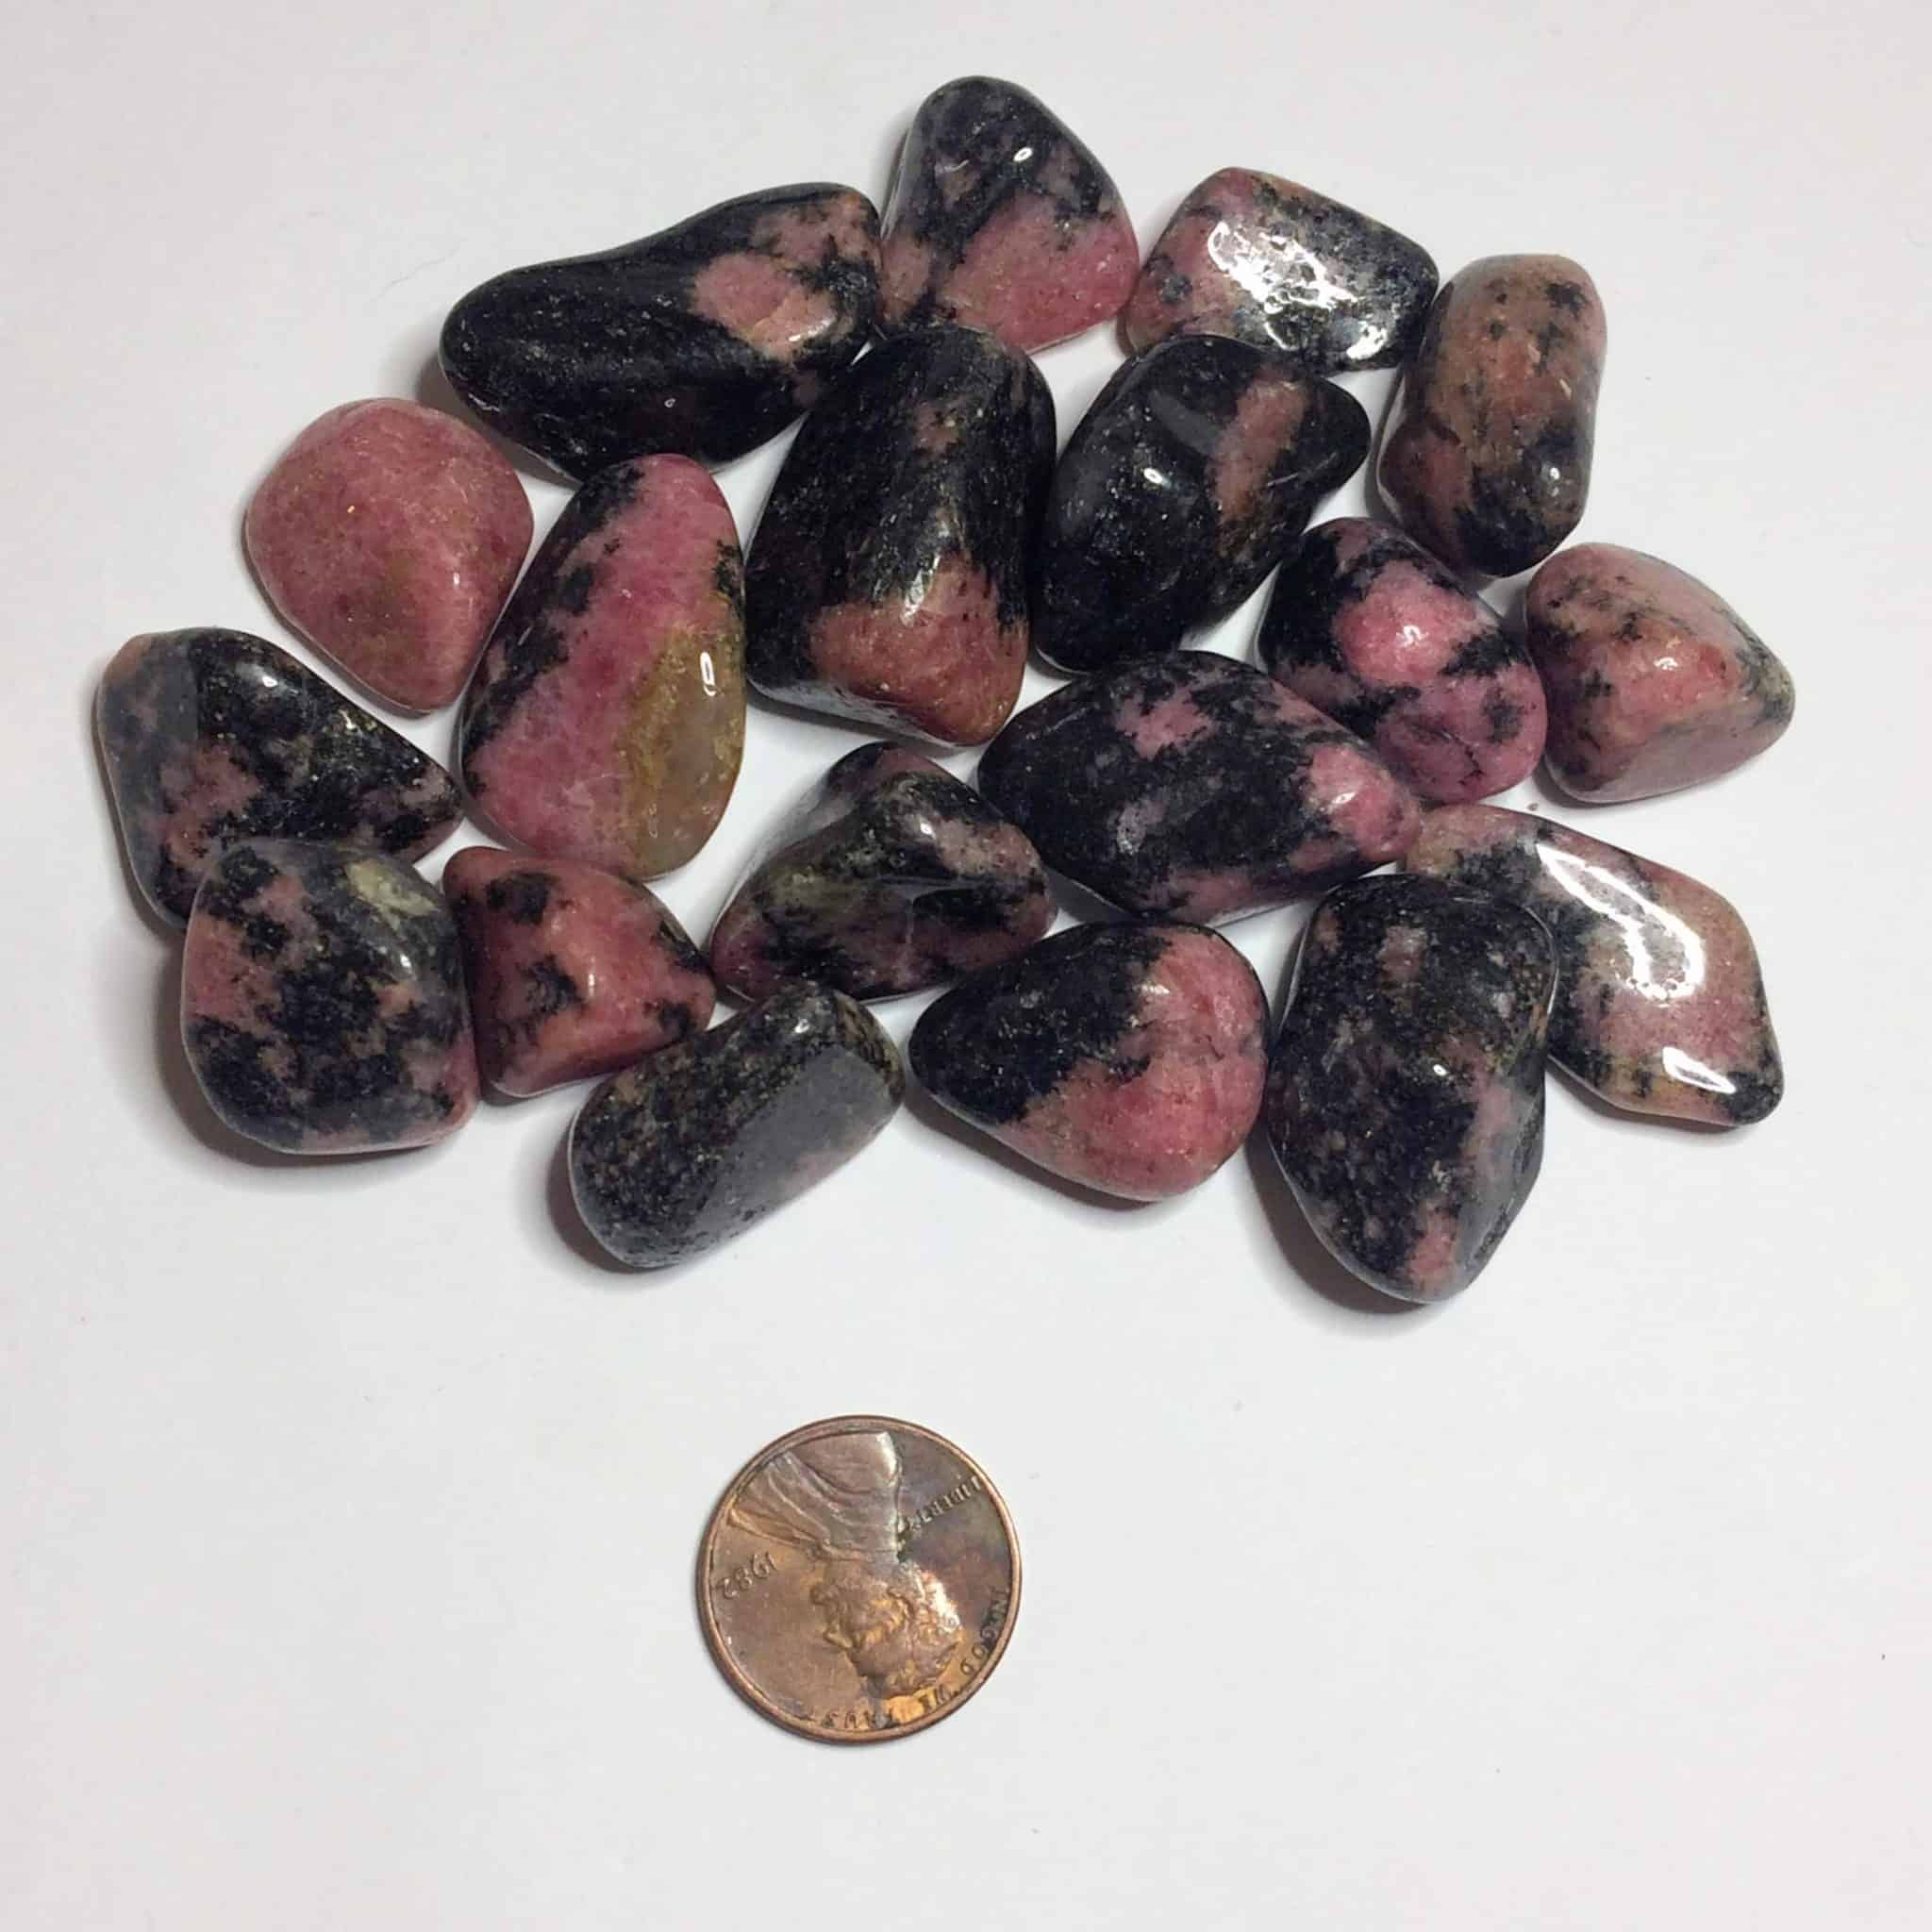 1 Rhodonite Tumbled Crystal Specimen with Description Card Details about   